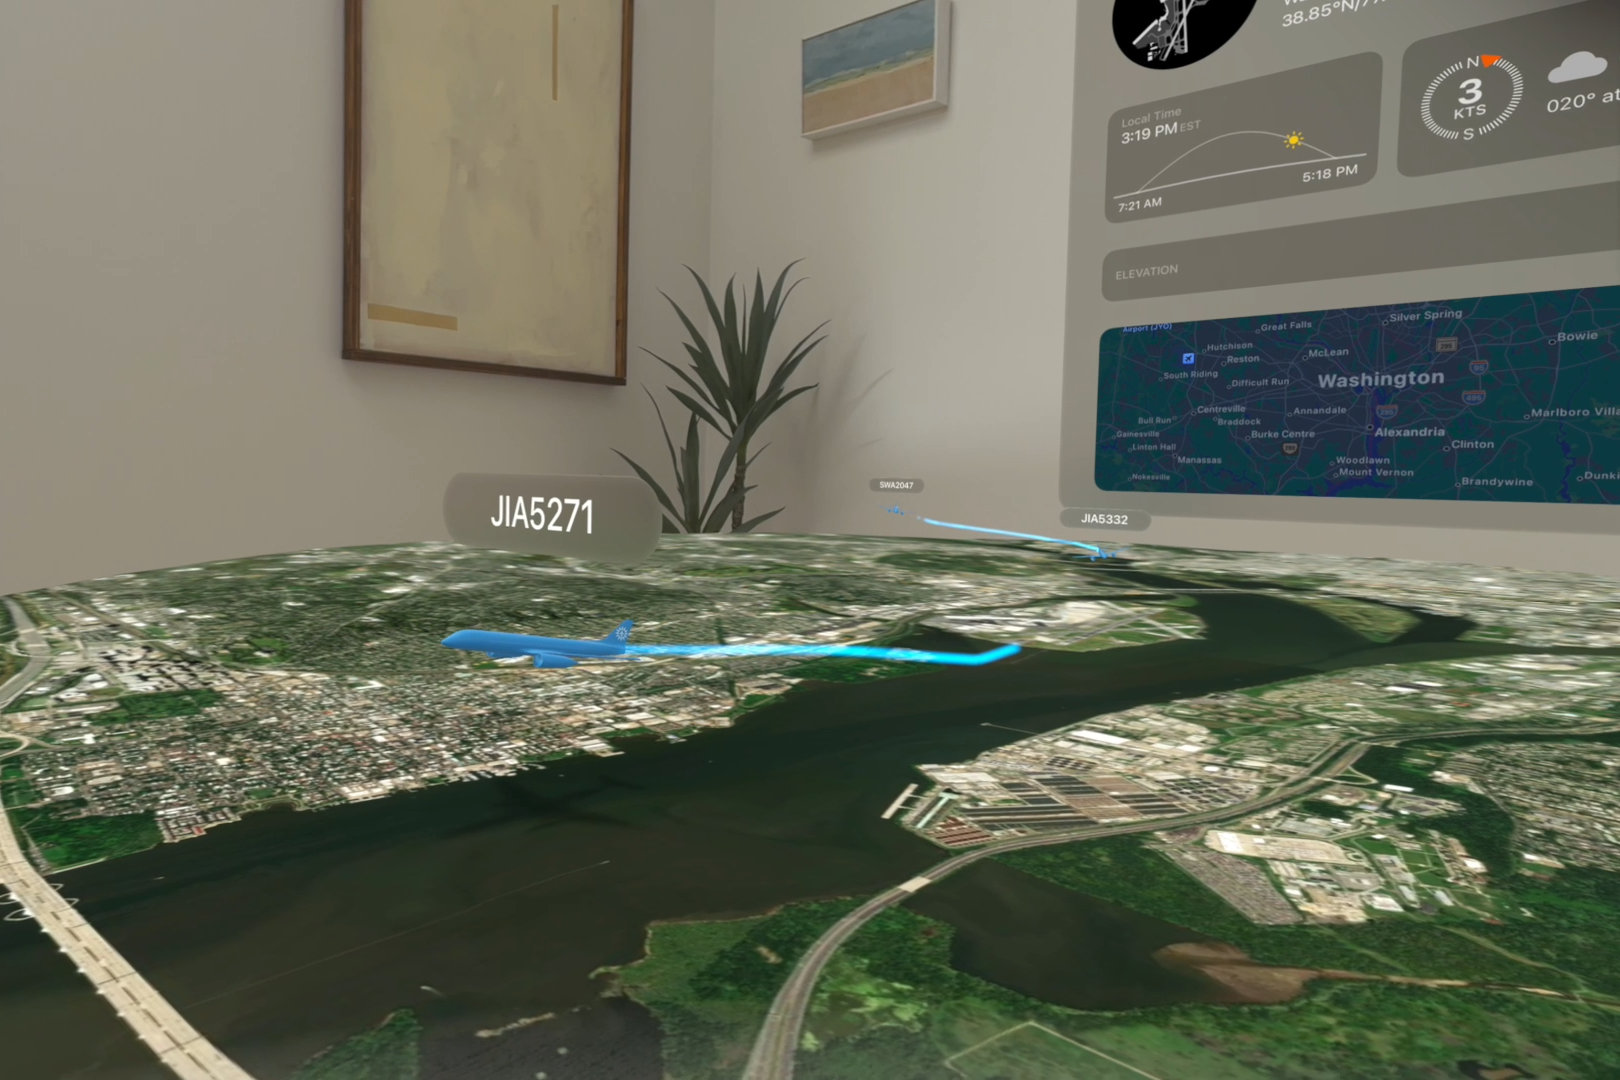 Voyager on Vision Pro lets you see airports in 3D in real-time.